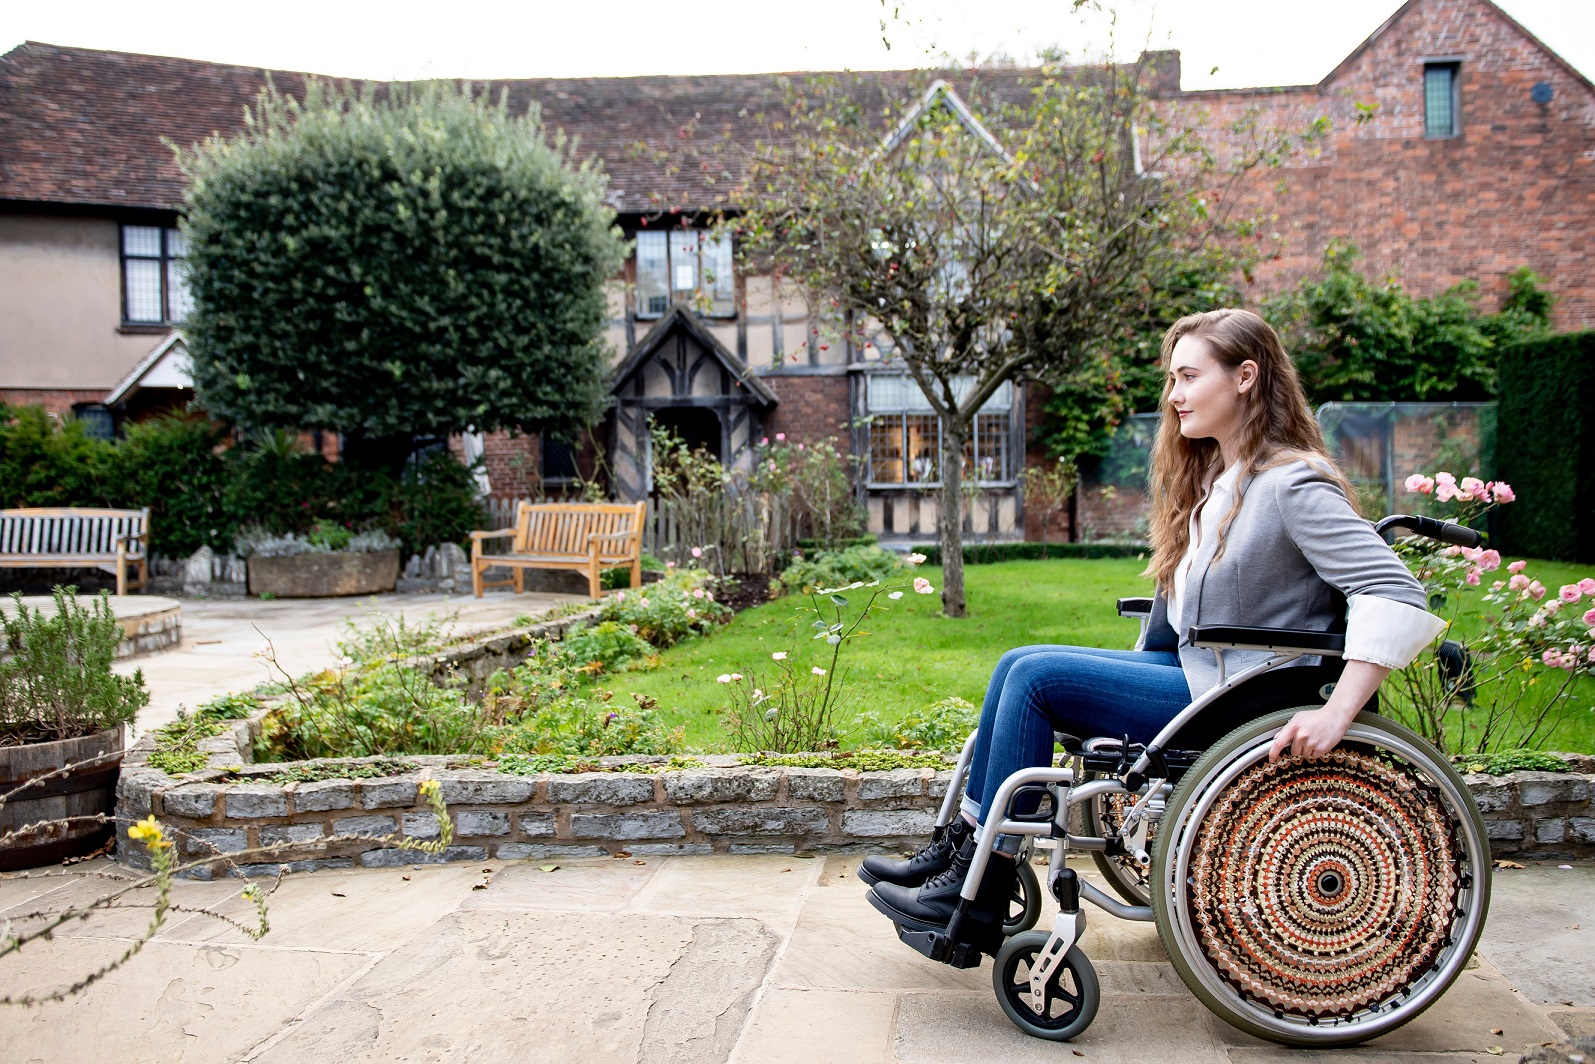 A wheelchair user guest uses a path outside an elizabethan house and garden